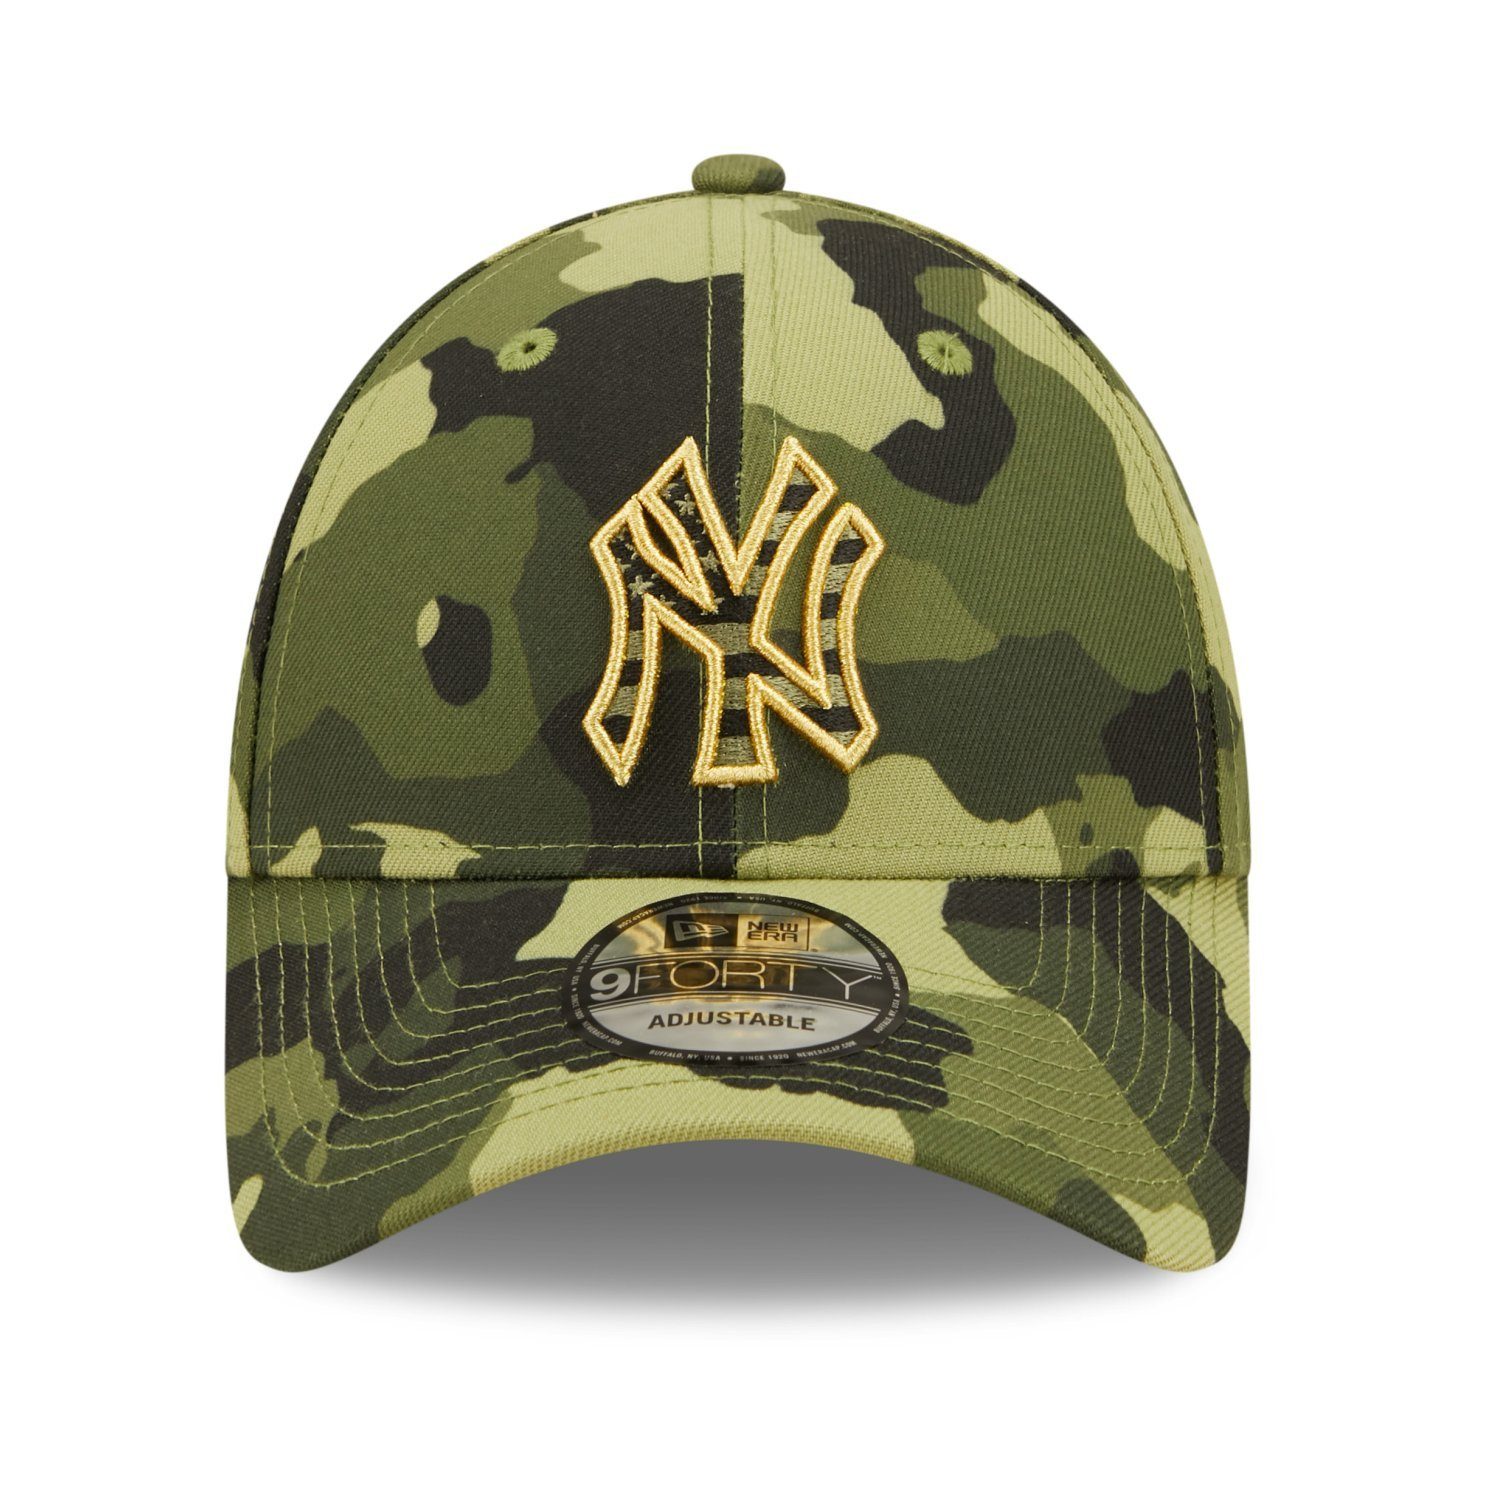 Era ARMED MLB FORCES New New 2022 Cap York Baseball DAY Yankees 9Forty